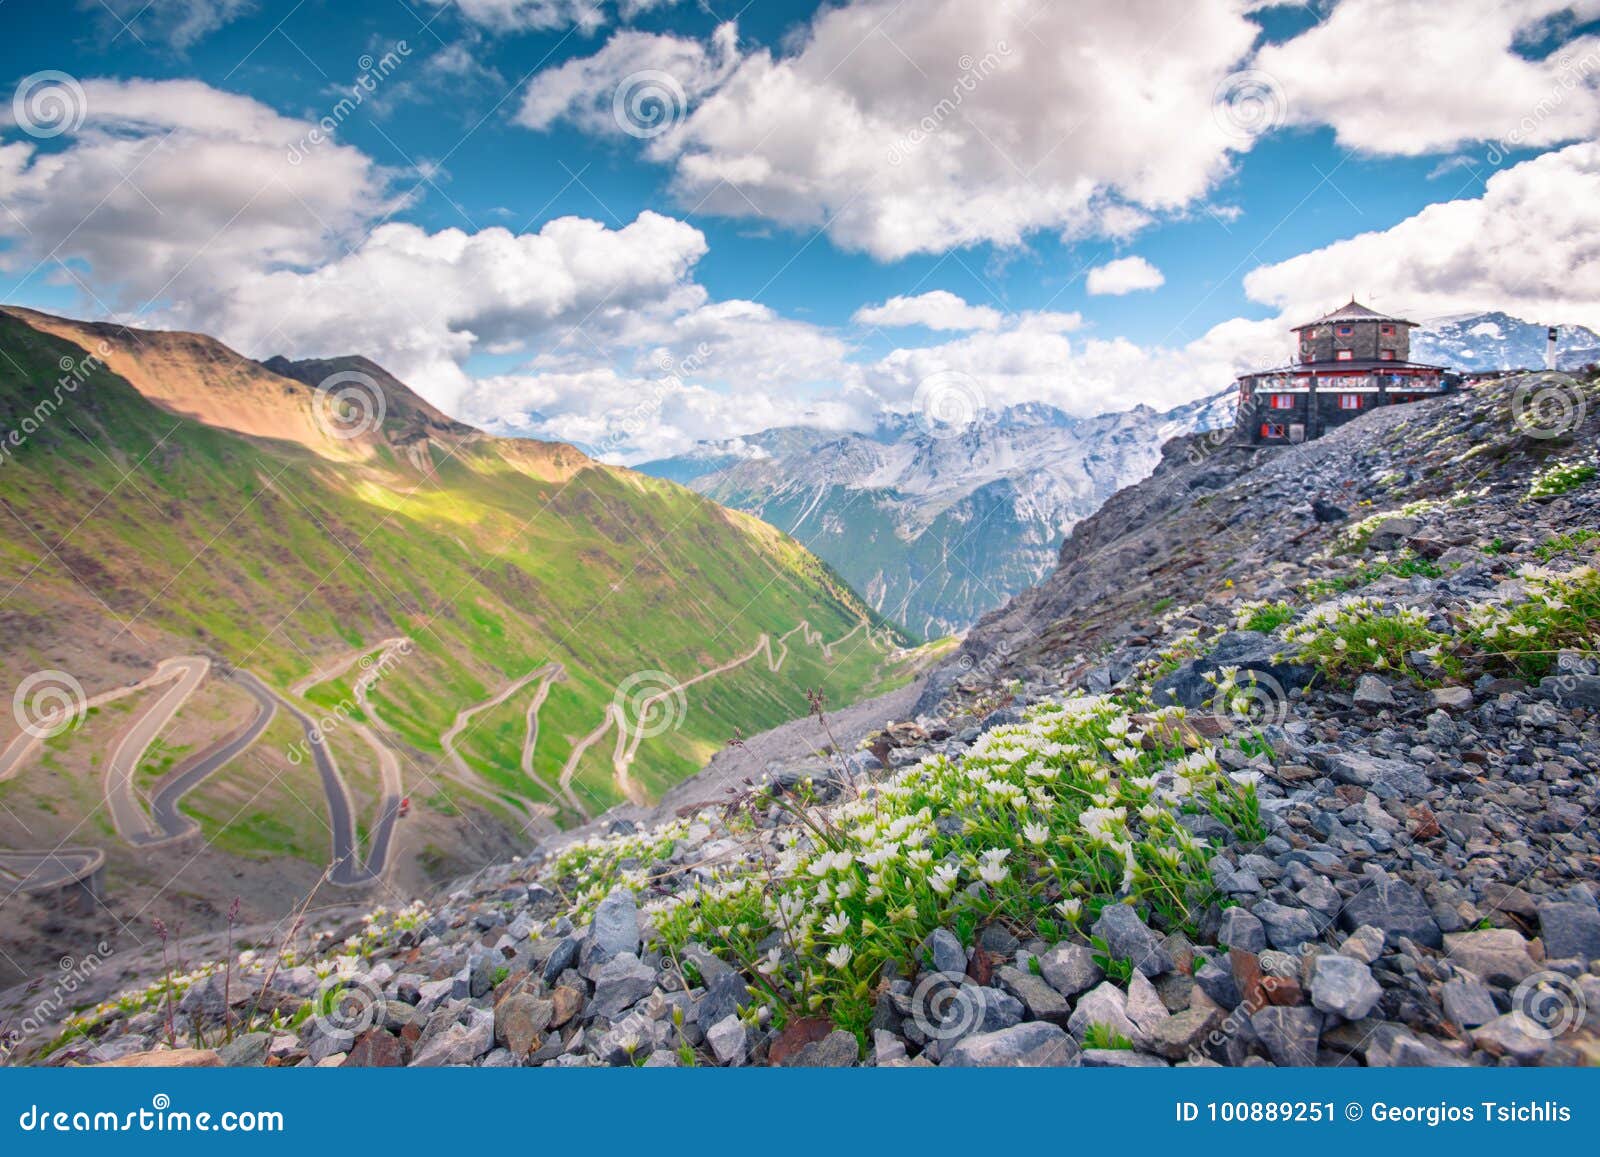 Italy Stelvio National Park Famous Road To Stelvio Pass In Ortler